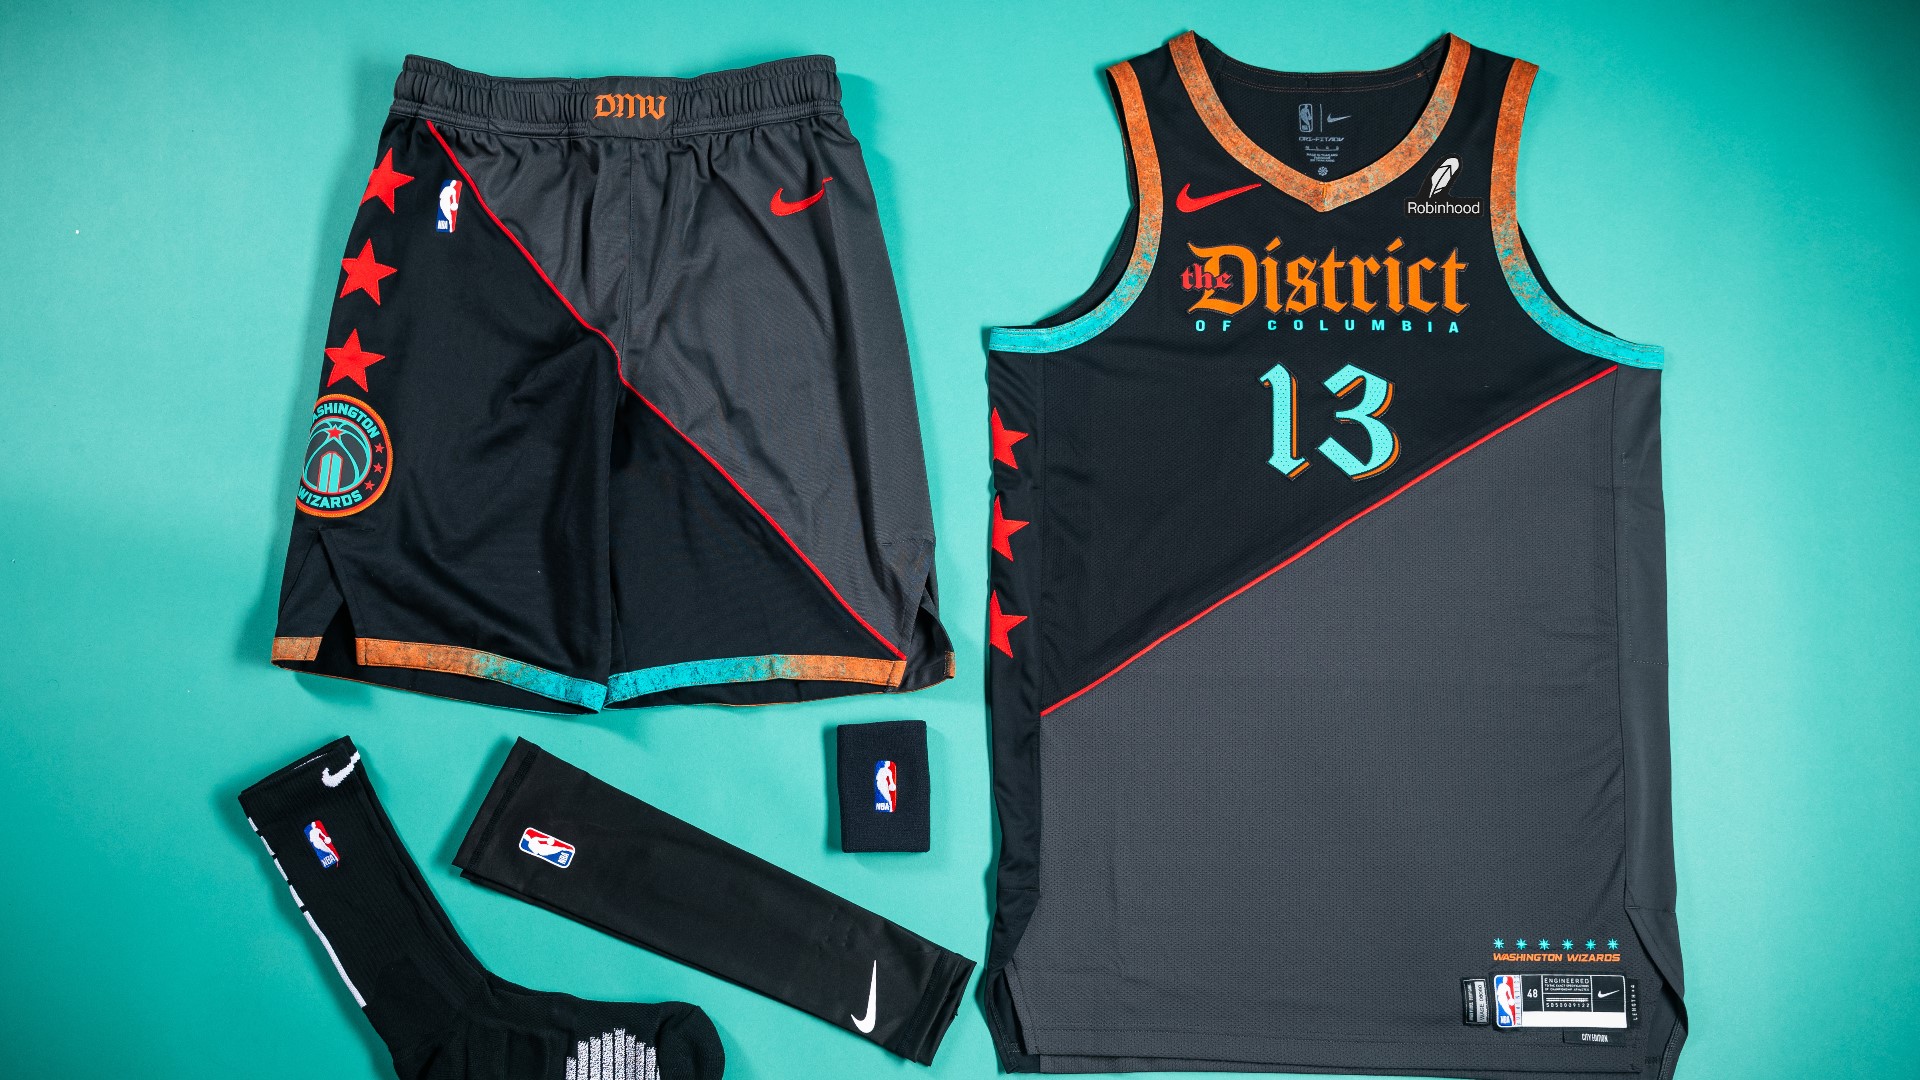 The Wizards new City Edition uniforms have a lot of history behind them.